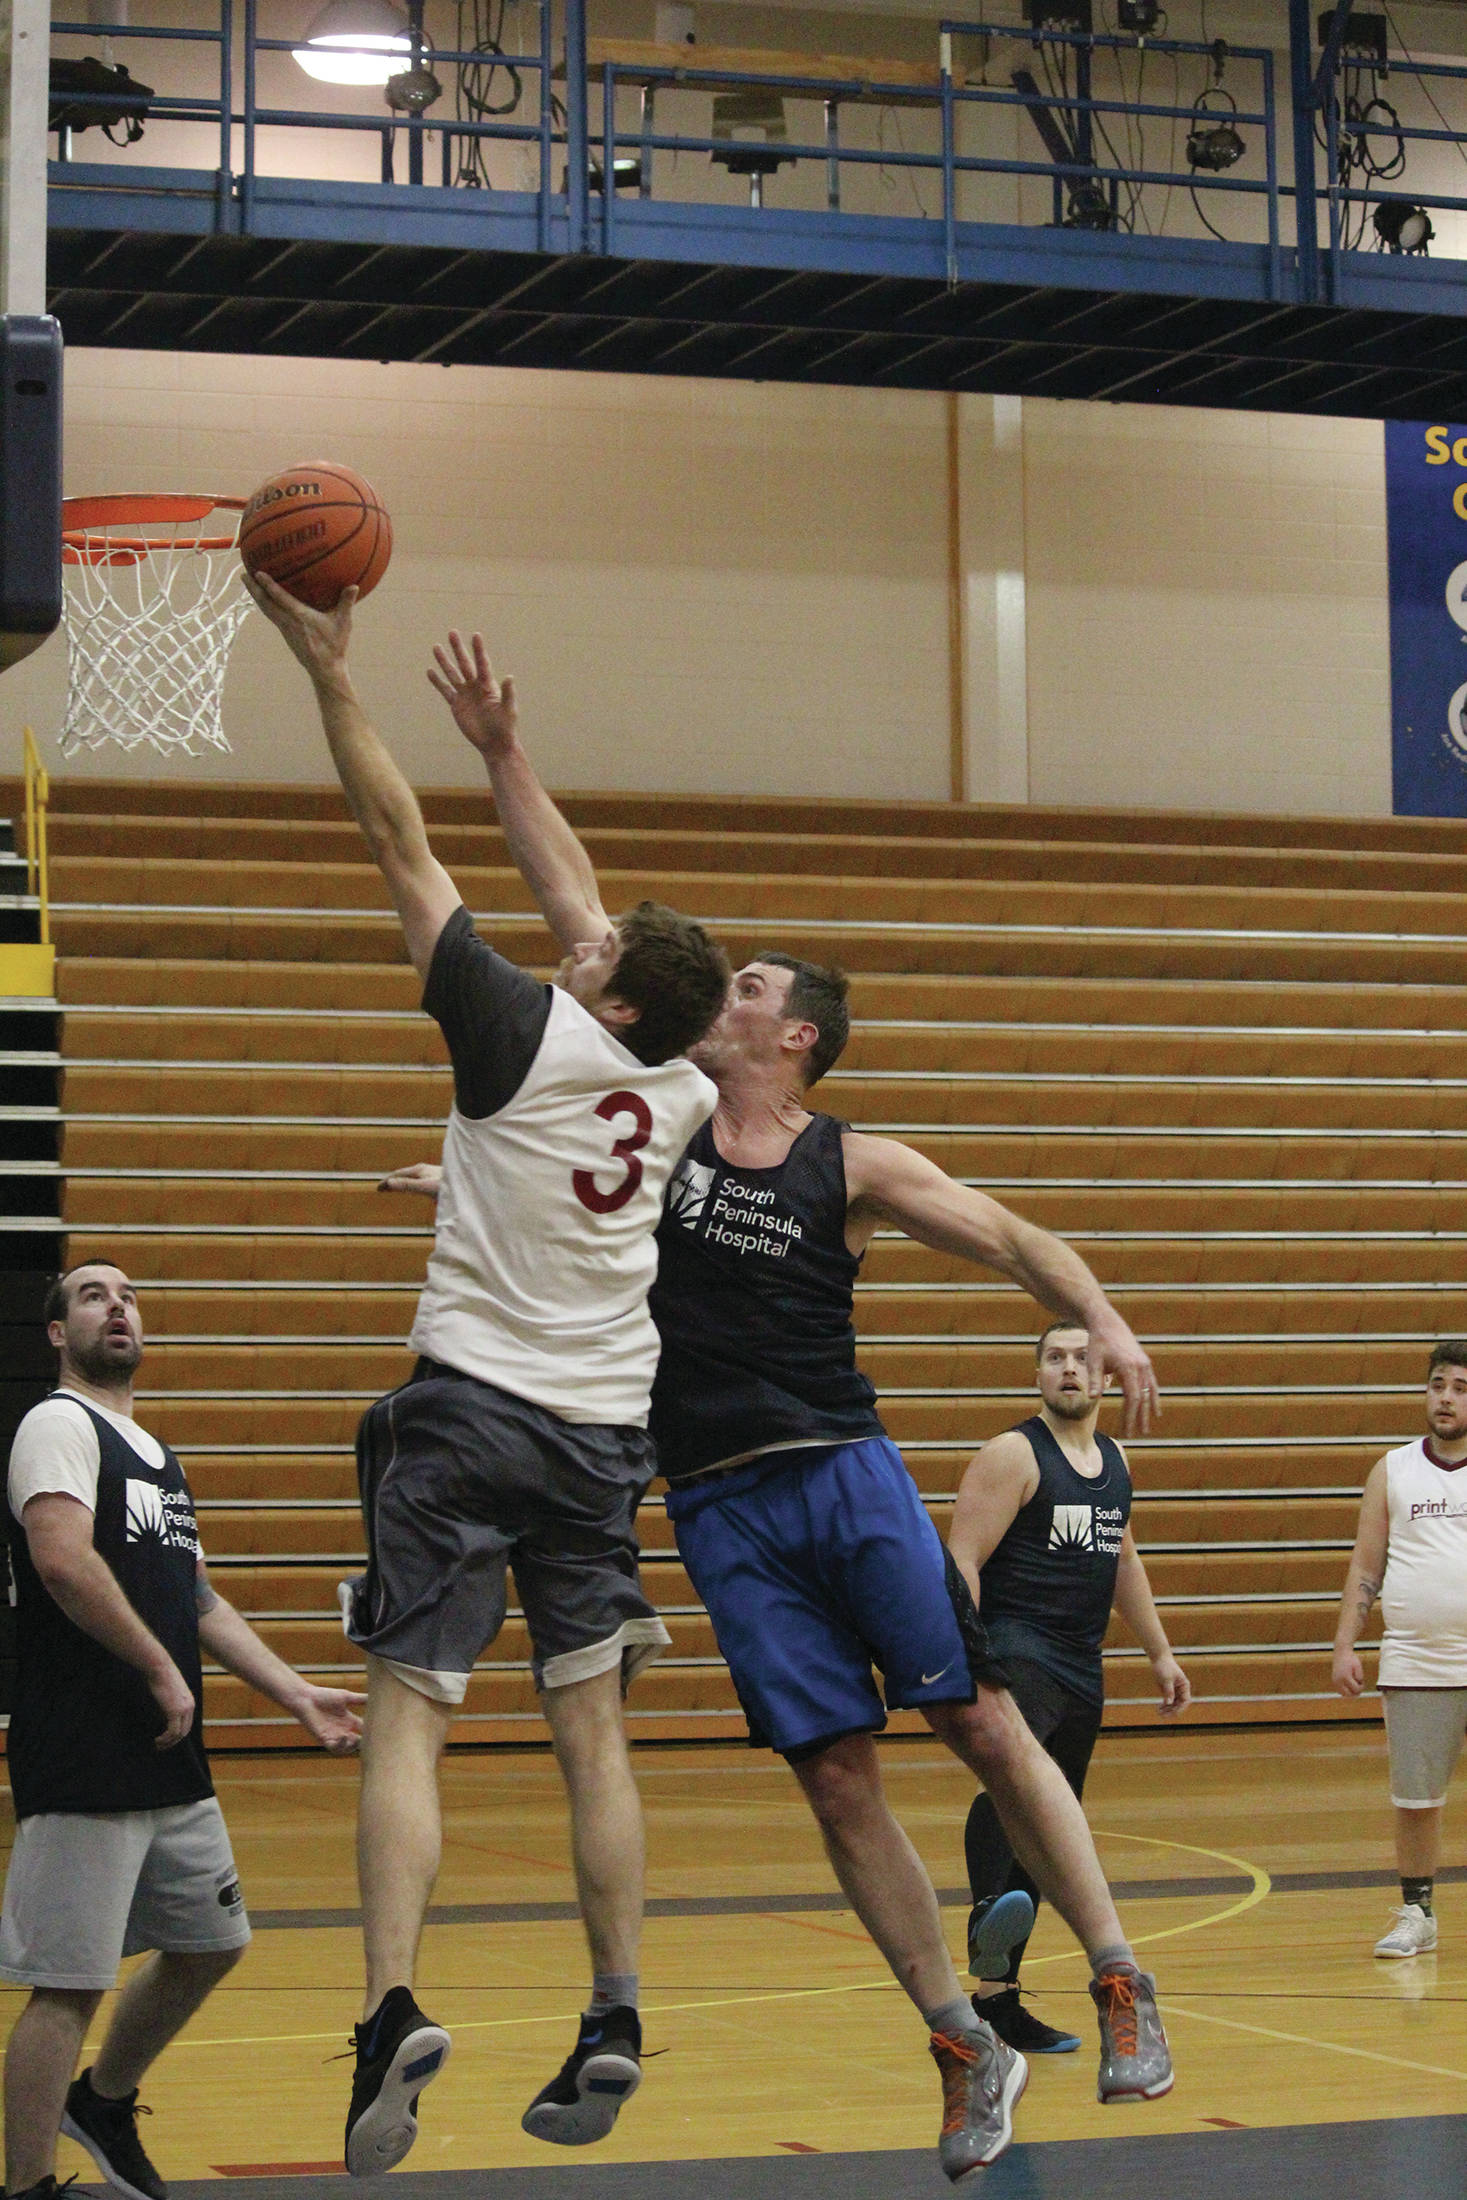 Gavin Keohane (No. 3) jumps to make a shot while Dan Miotke follows during the championship game of the Homer Community Recreation Department’s Adult Basketball League Playoffs on Monday, Feb. 17, 2020 at Homer High School in Homer, Alaska. (Photo by Megan Pacer/Homer News)